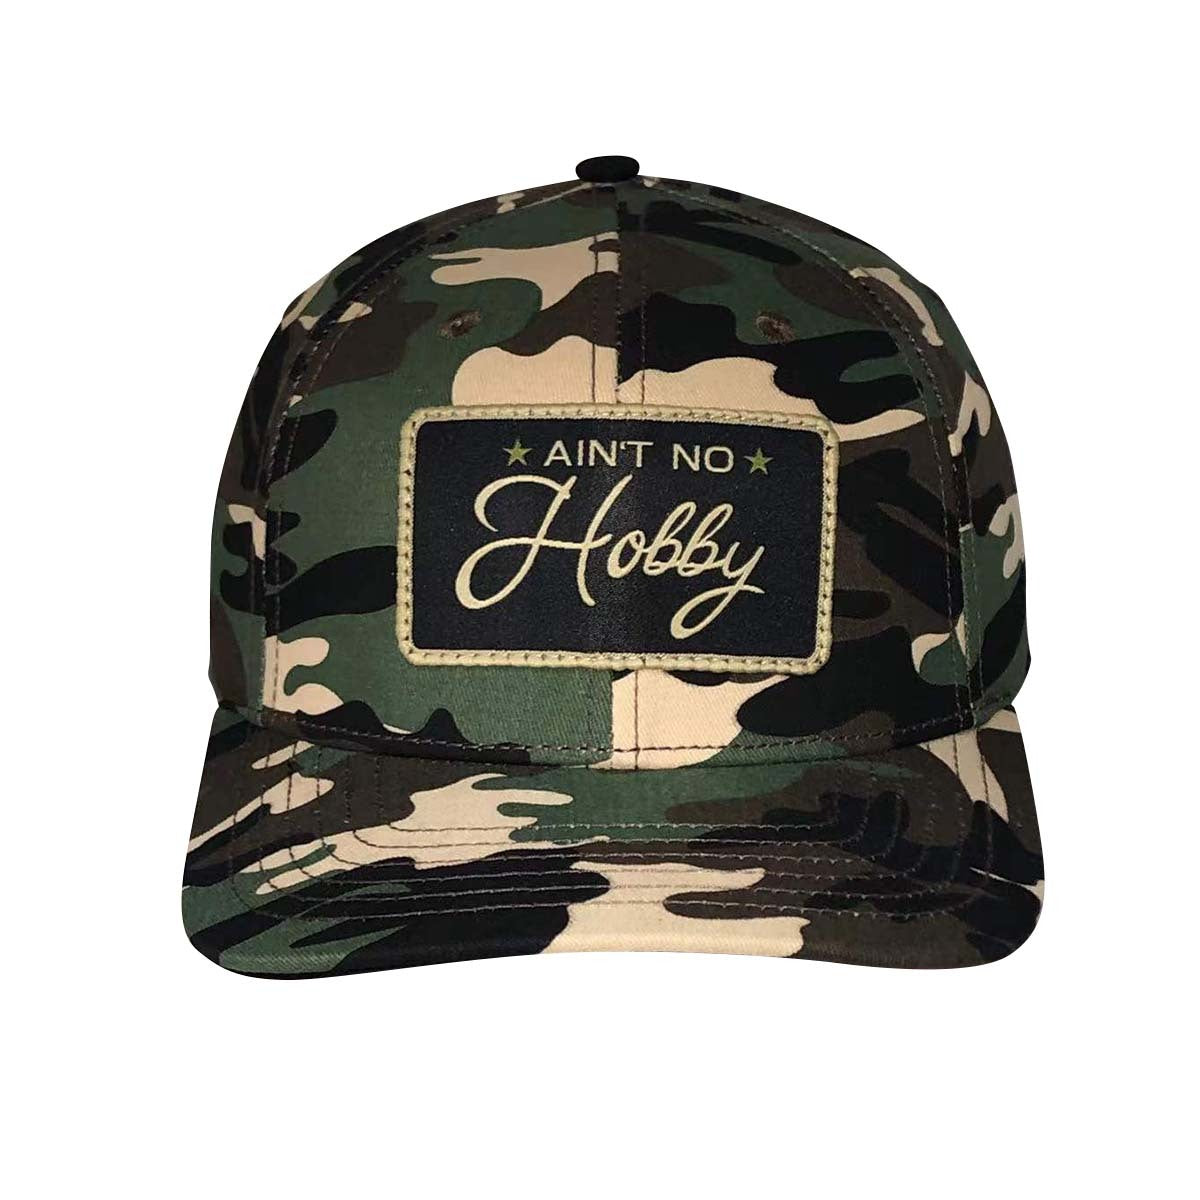 Barstool Golf Ain't No Hobby Patch Camo Snapback Hat II-Hats-Fore Play-One Size-Green-Barstool Sports